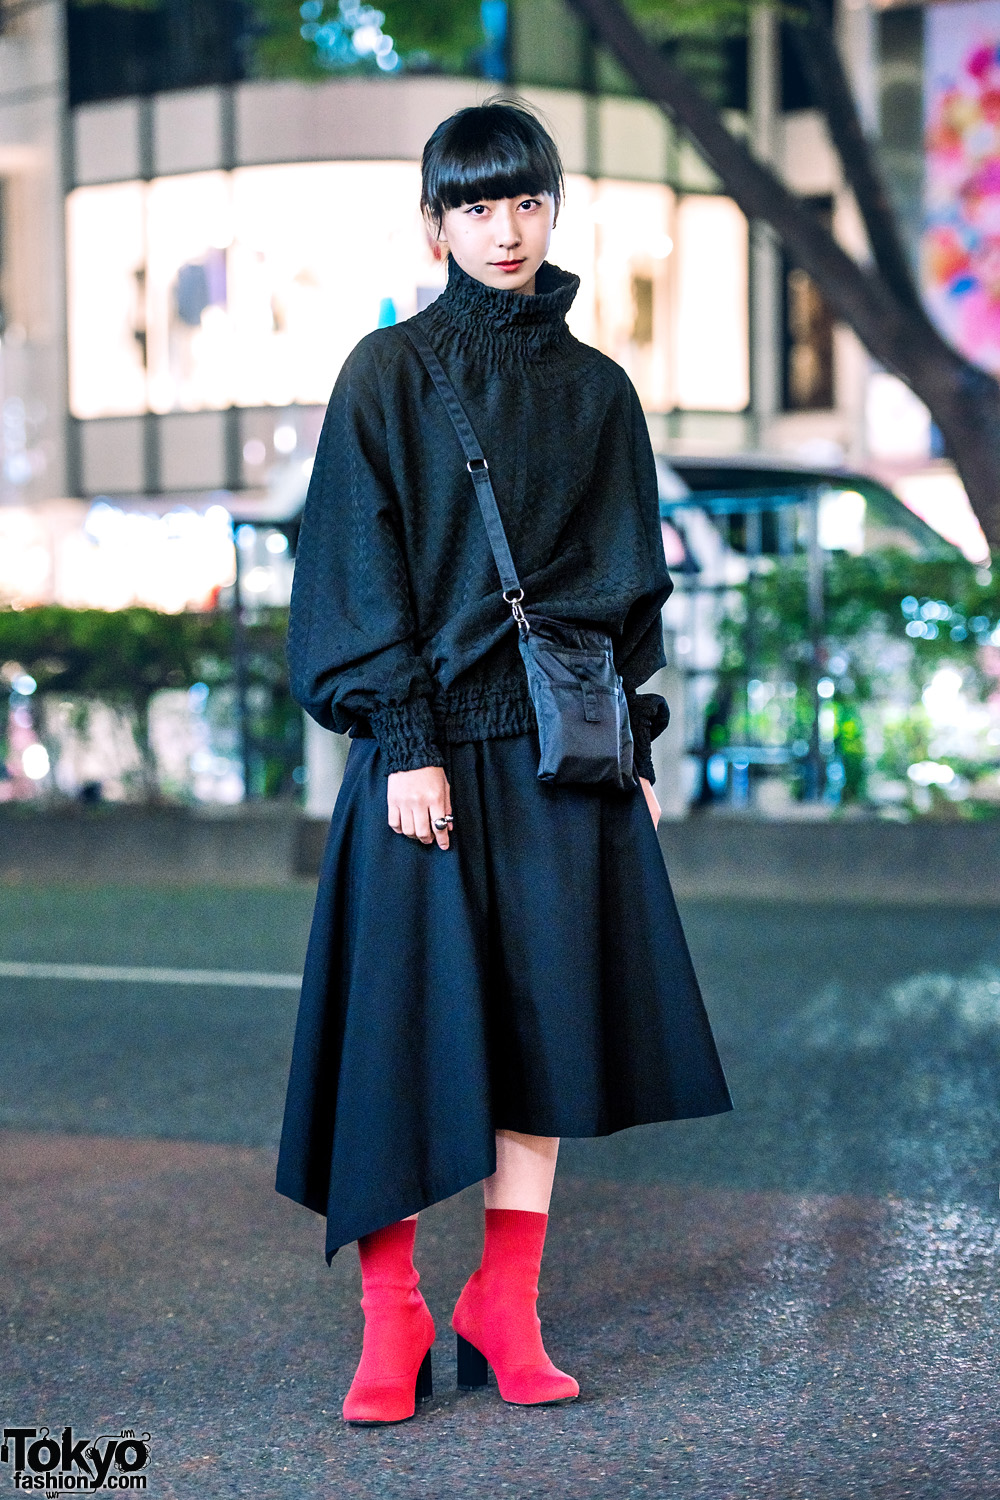 Menswear Street Style in Tokyo w/ Suede Coat, Floral Shirt, Comme des  Garcons Cuffed Pants, Hare Buckle Shoes & Goyard Bag – Tokyo Fashion